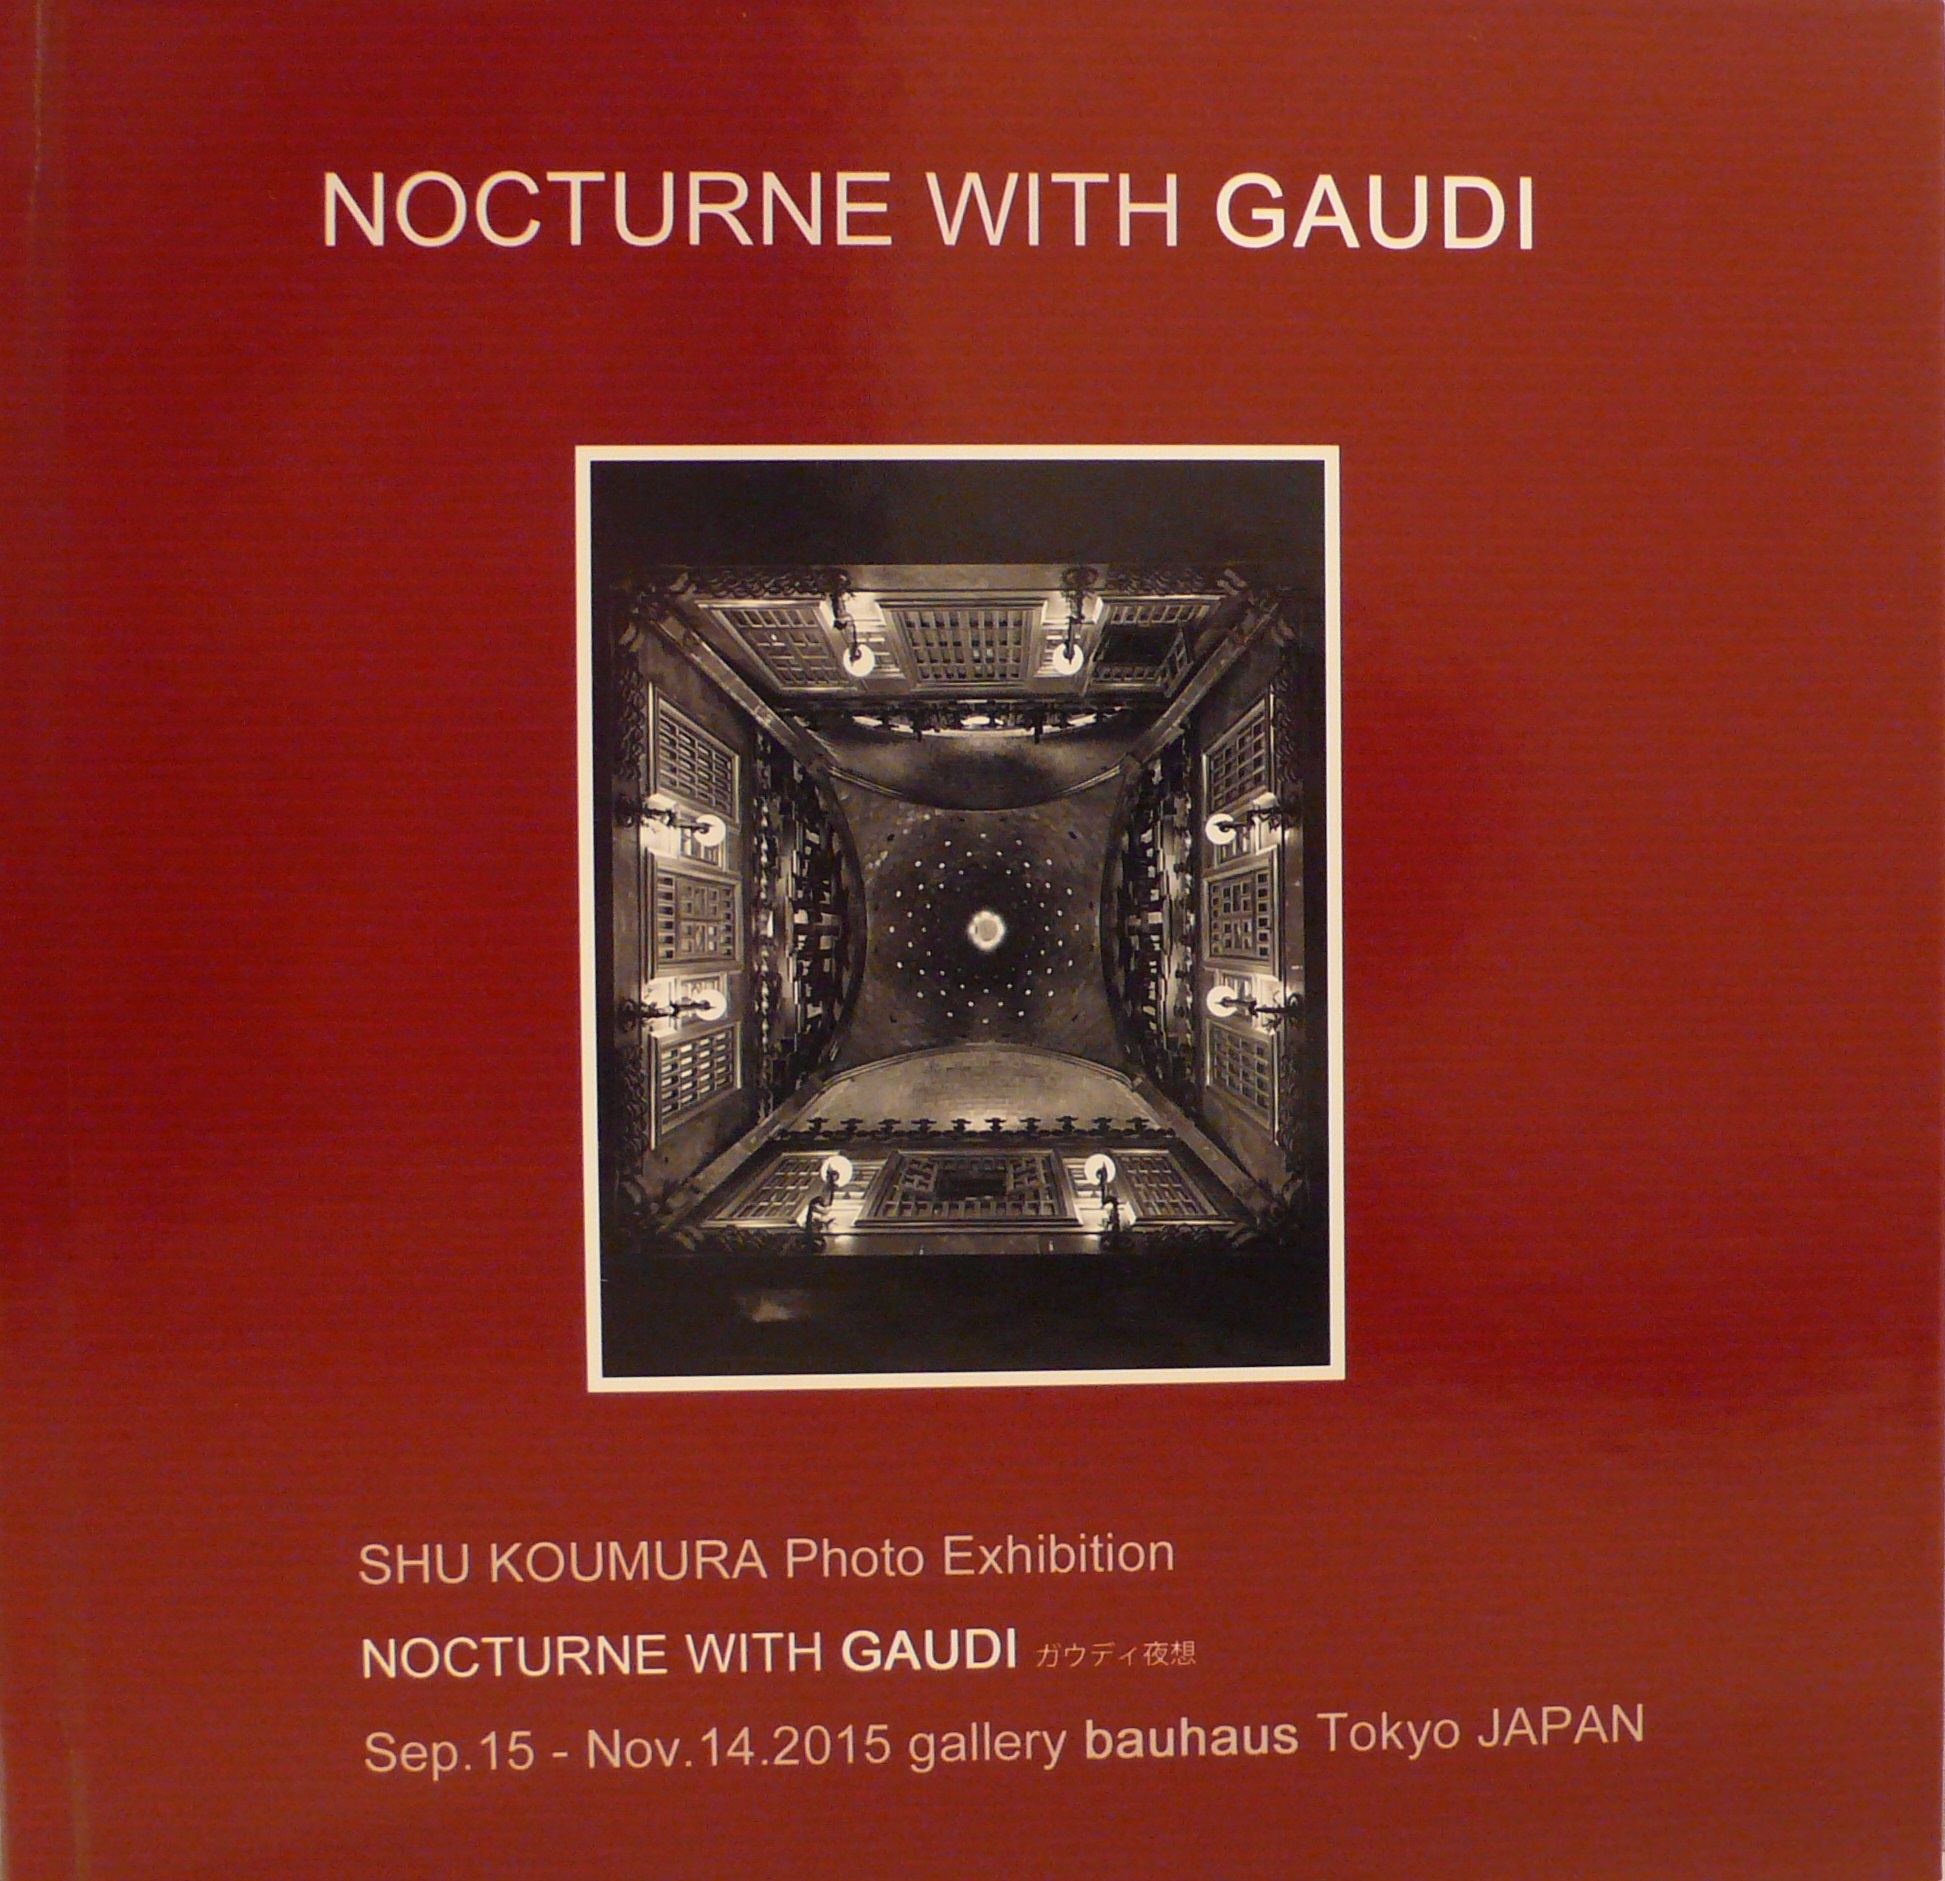 NOCTURNE WITH GAUDI